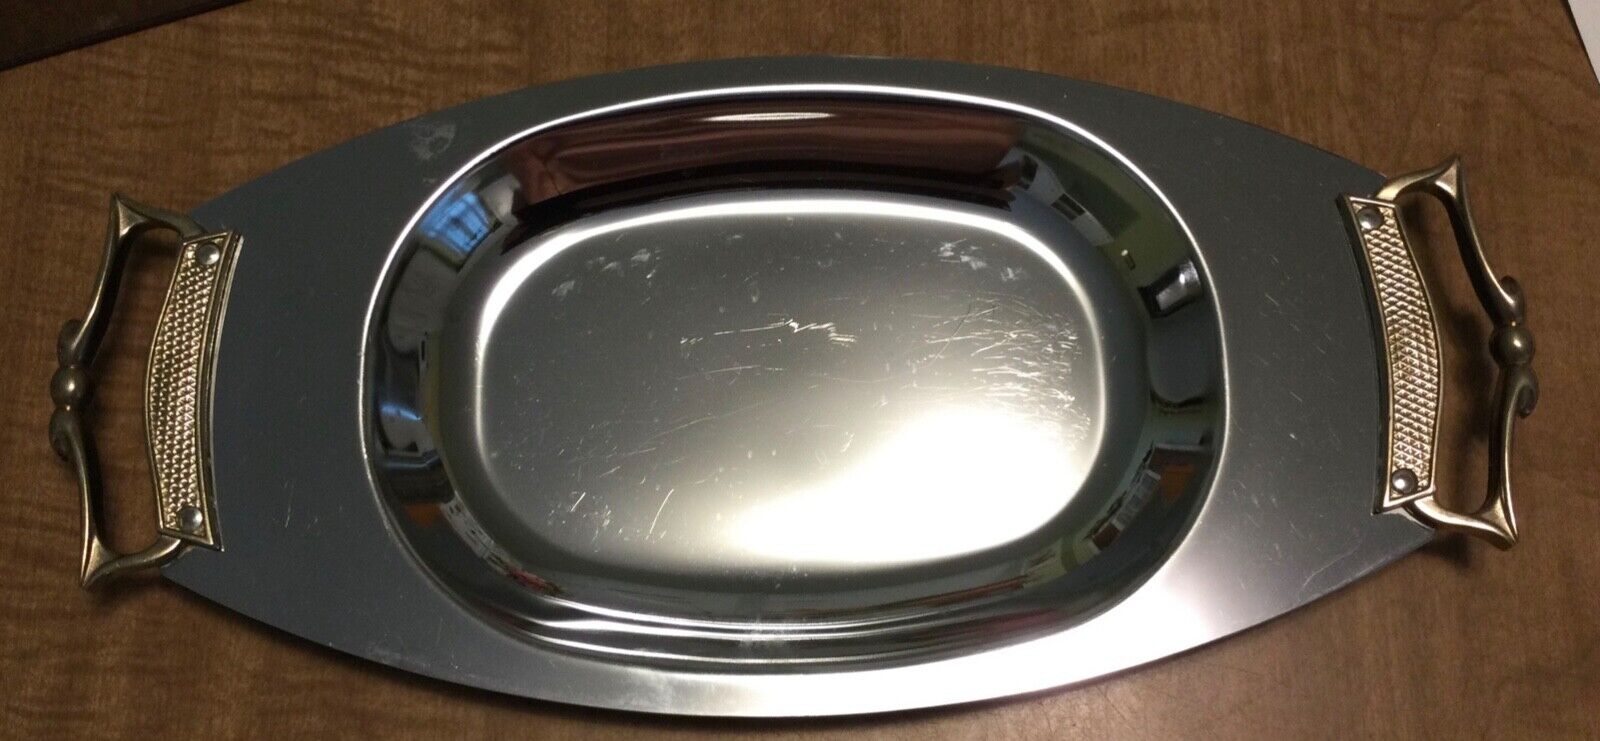 Kromex Chrome Tray Long Metal Serving Dish Gold Handles Mod 1960\'s Made in USA